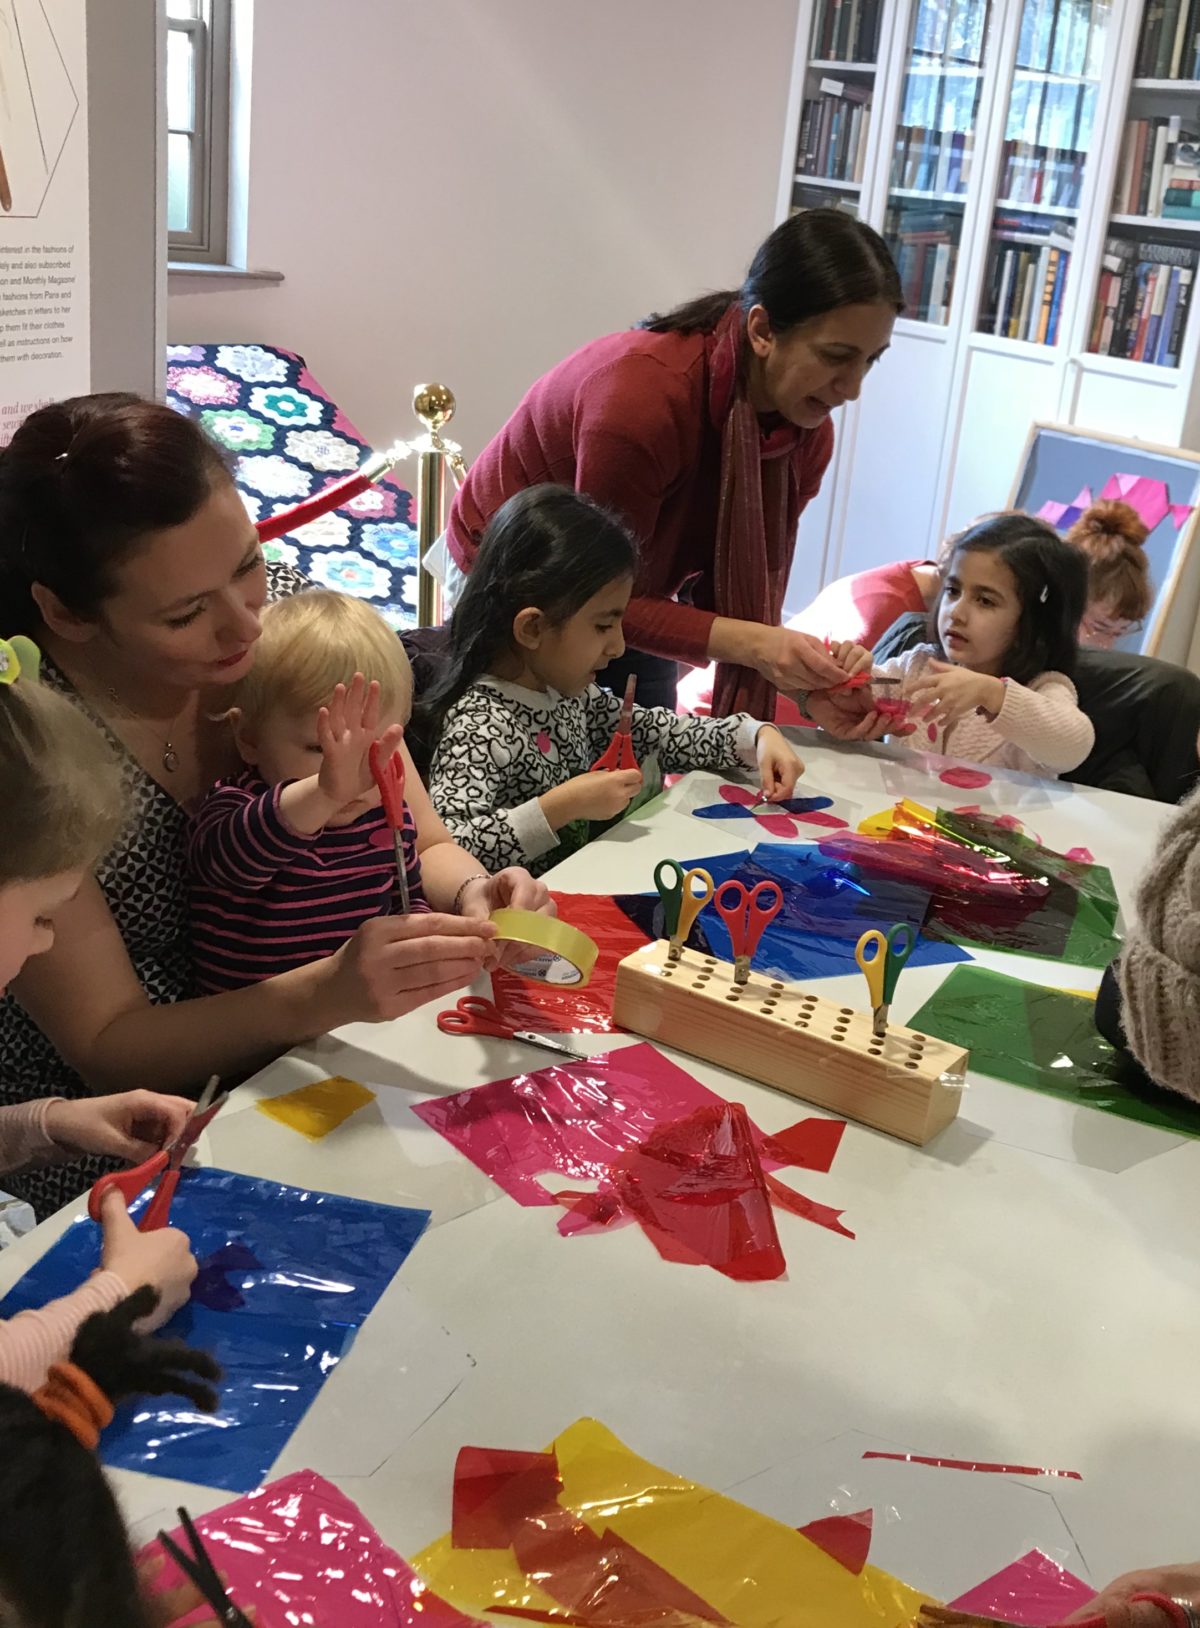 A group of children and their grown-ups doing a craft activity.